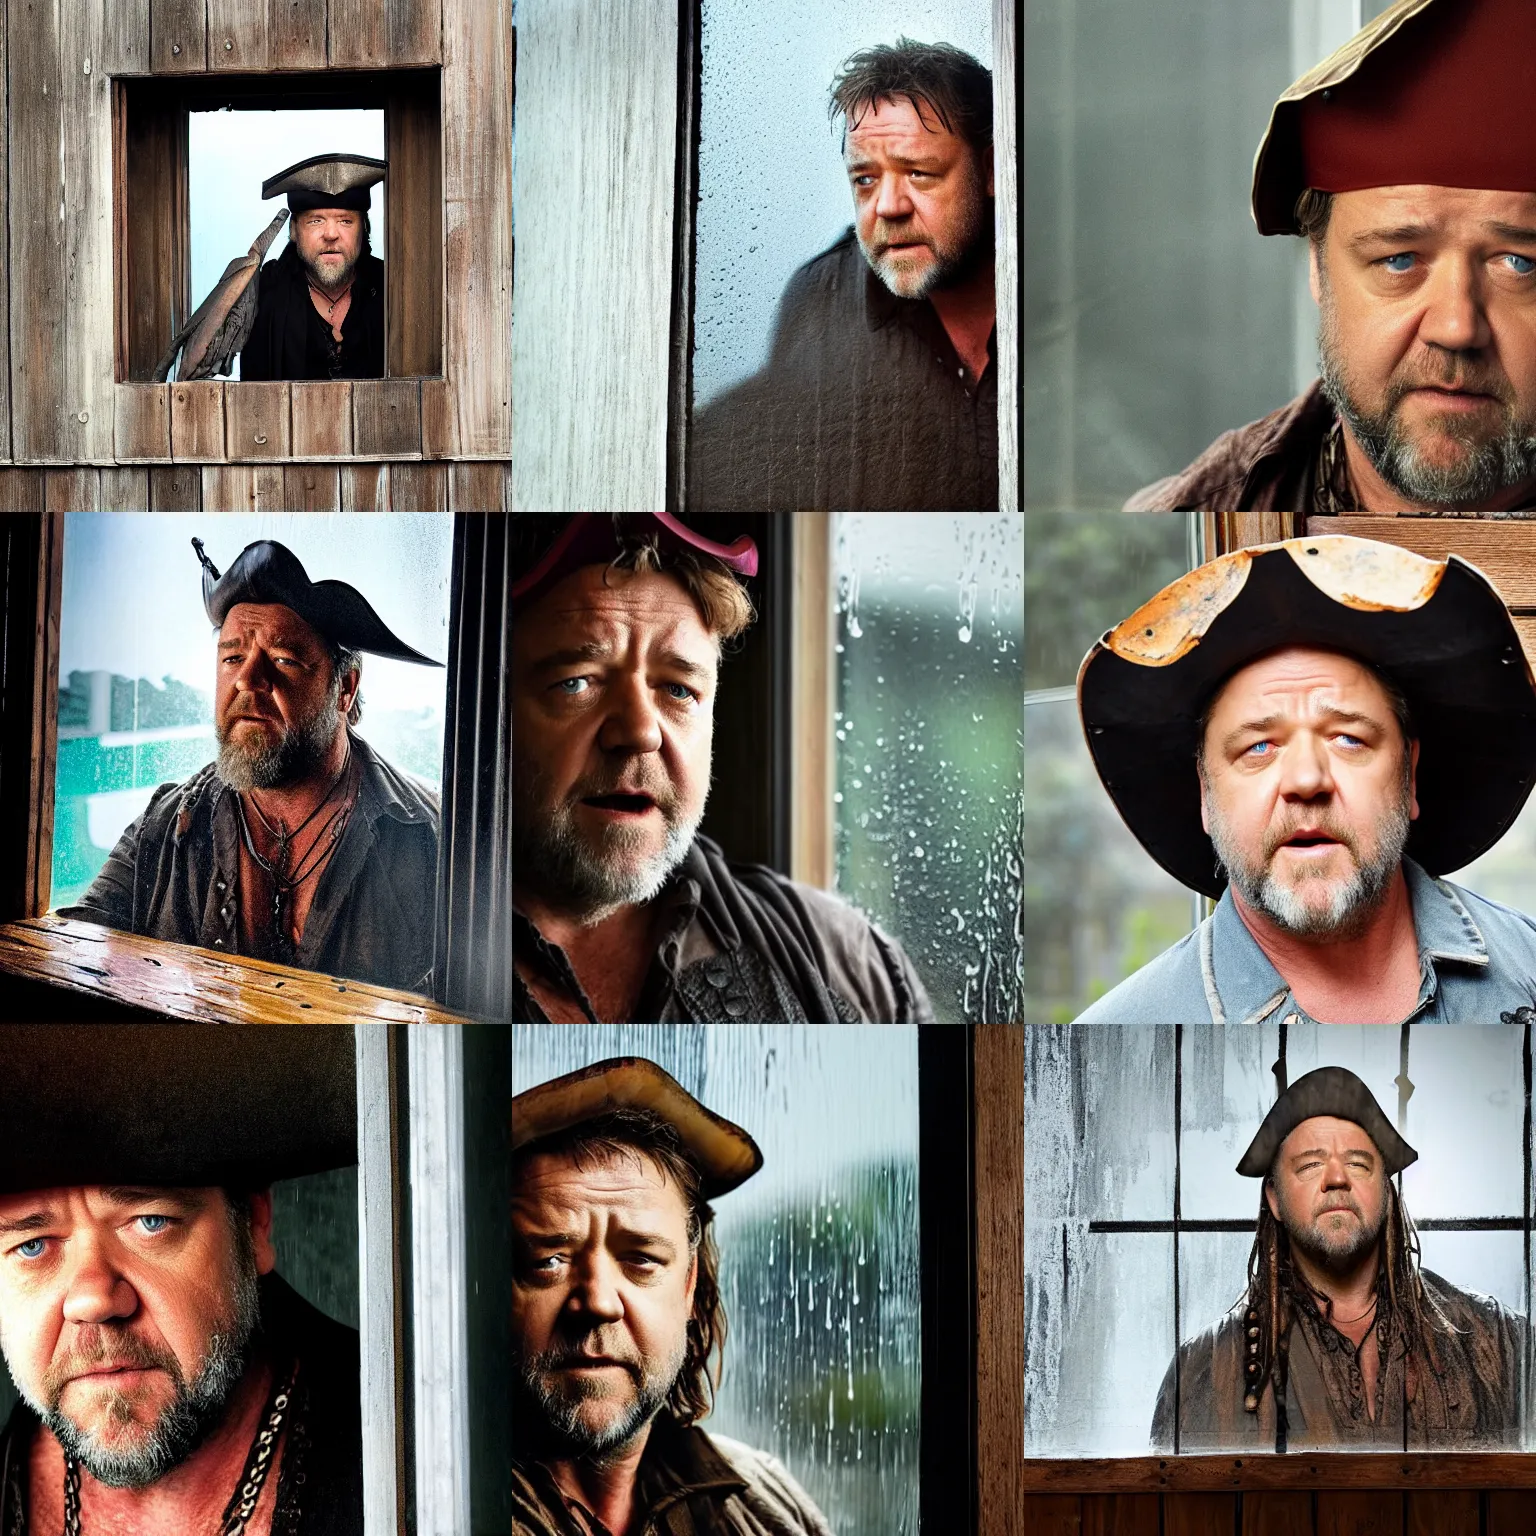 Prompt: russell crowe wearing a giant pirate hat behind a rainy dirty window and wooden wall peering out to the camera